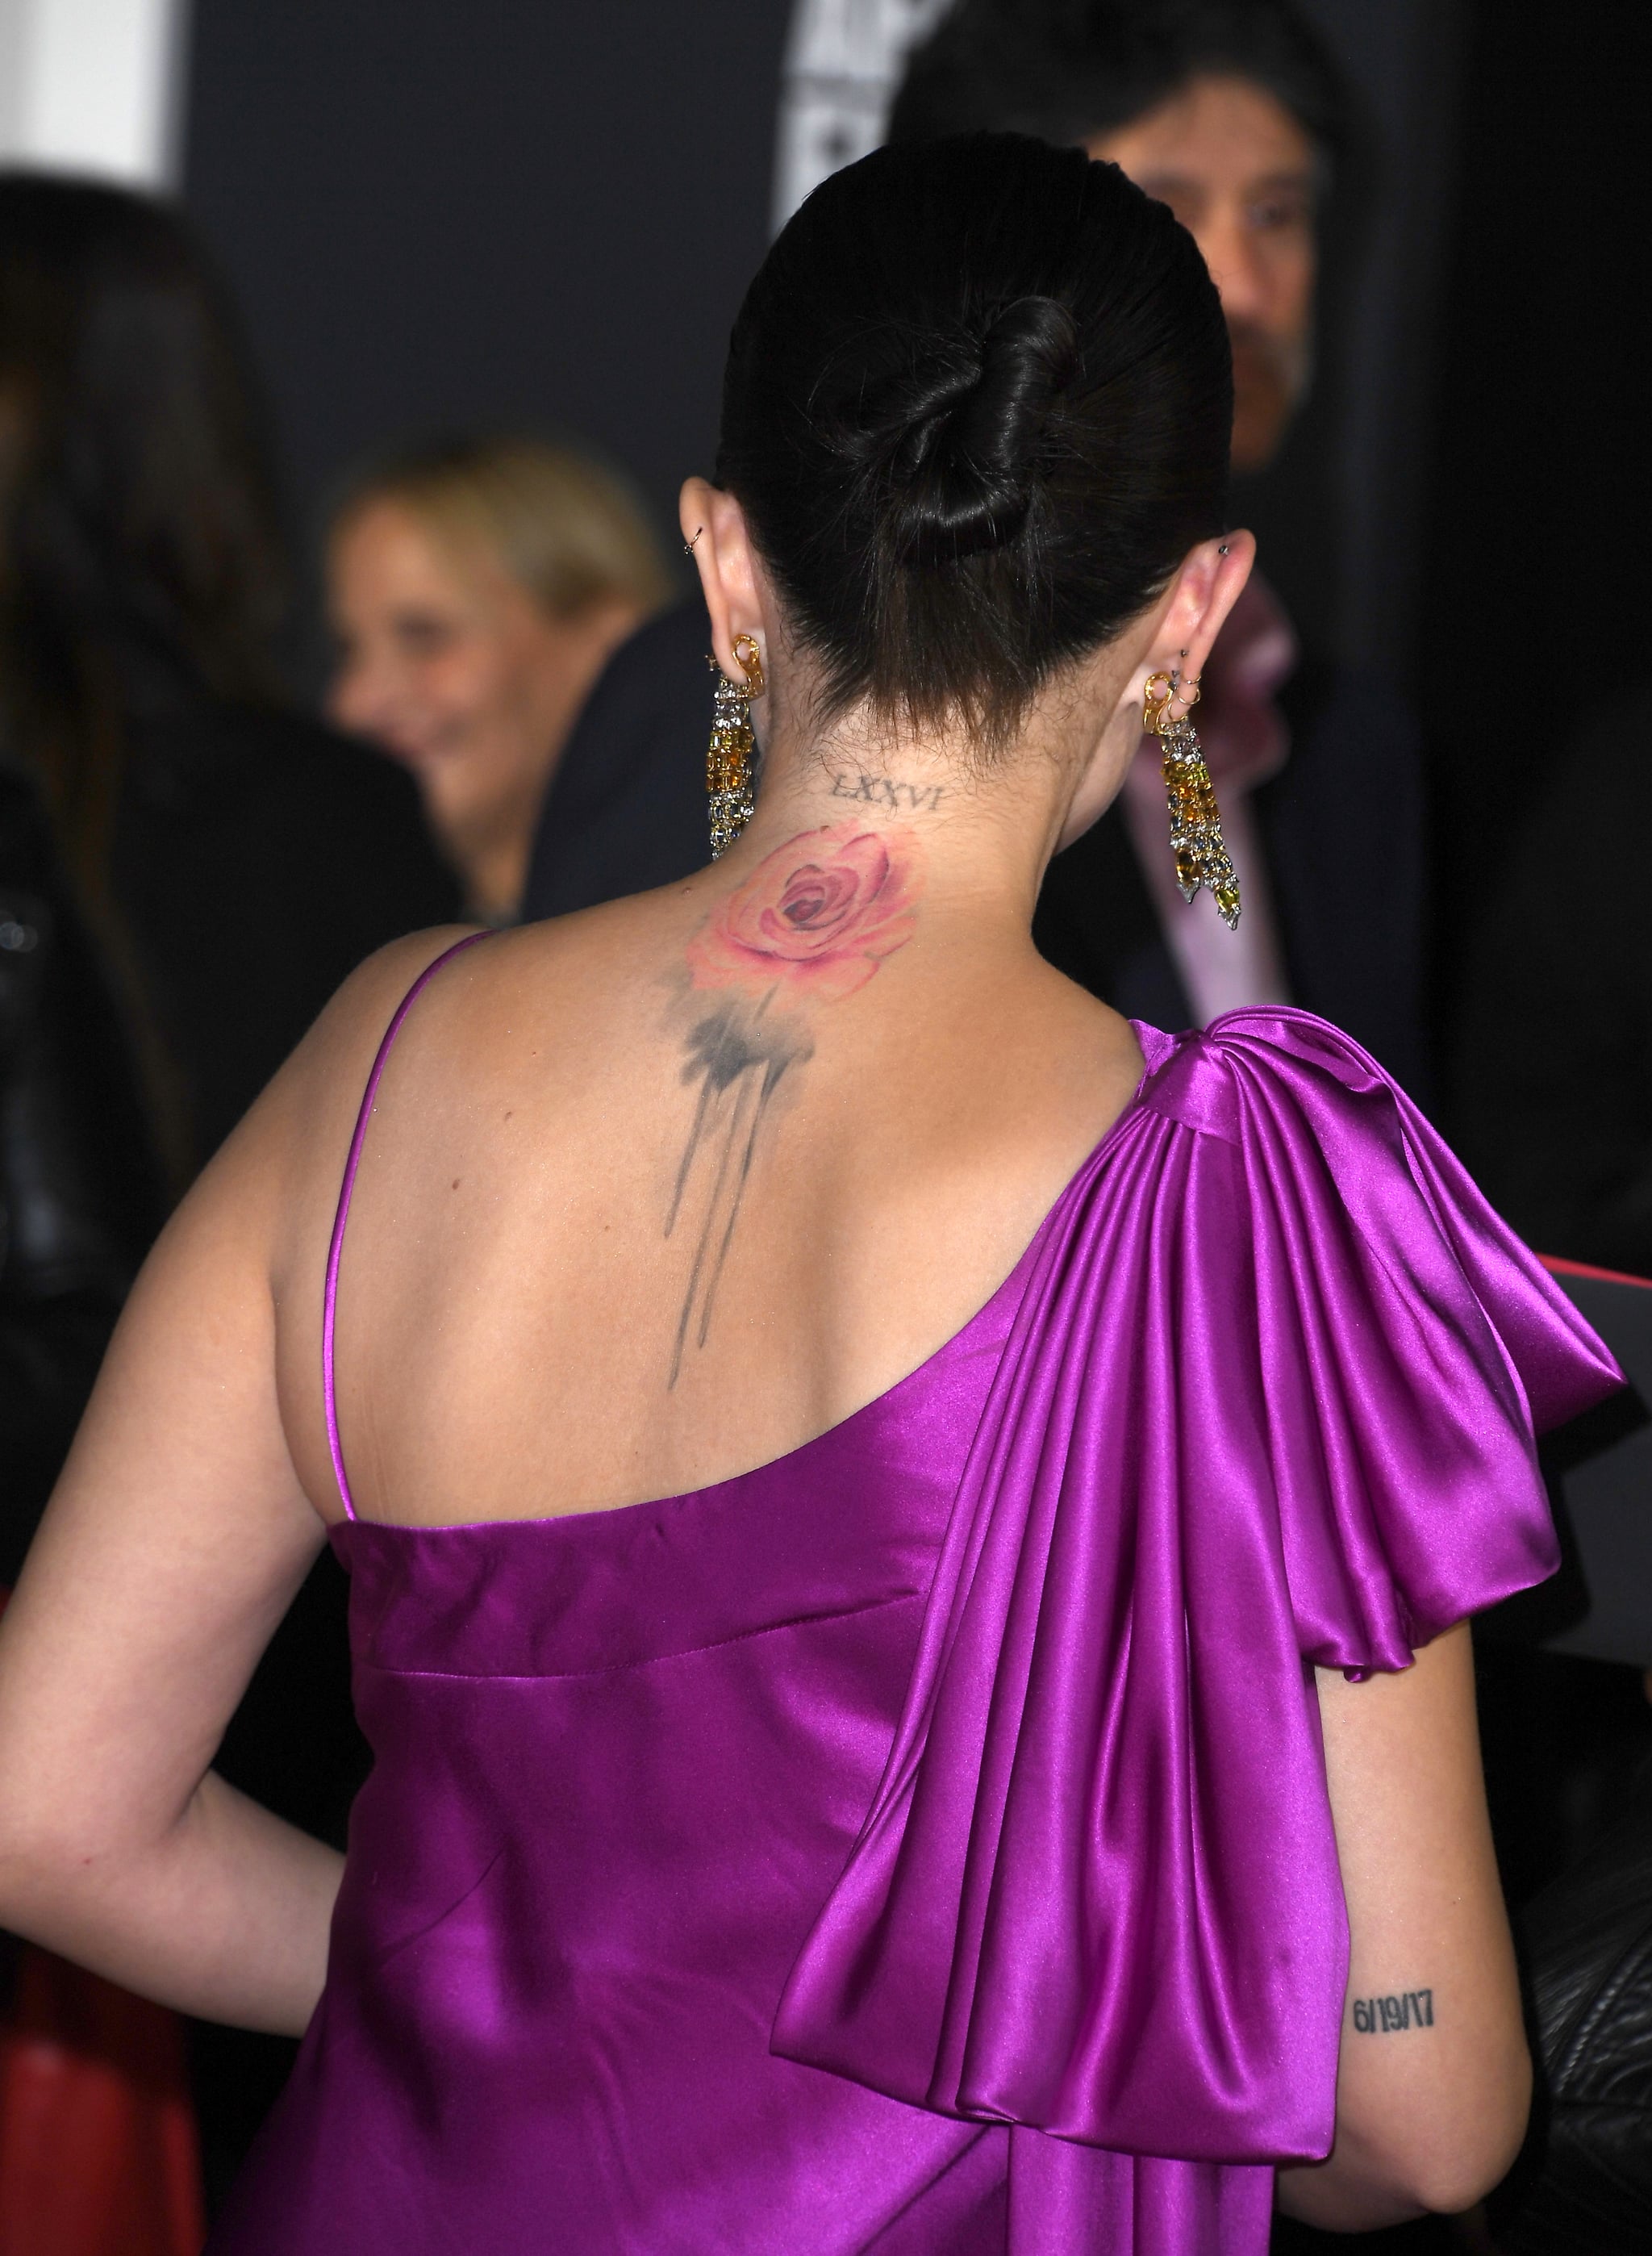 17 Selena Gomezs Tattoos And Their Meanings Full Guide